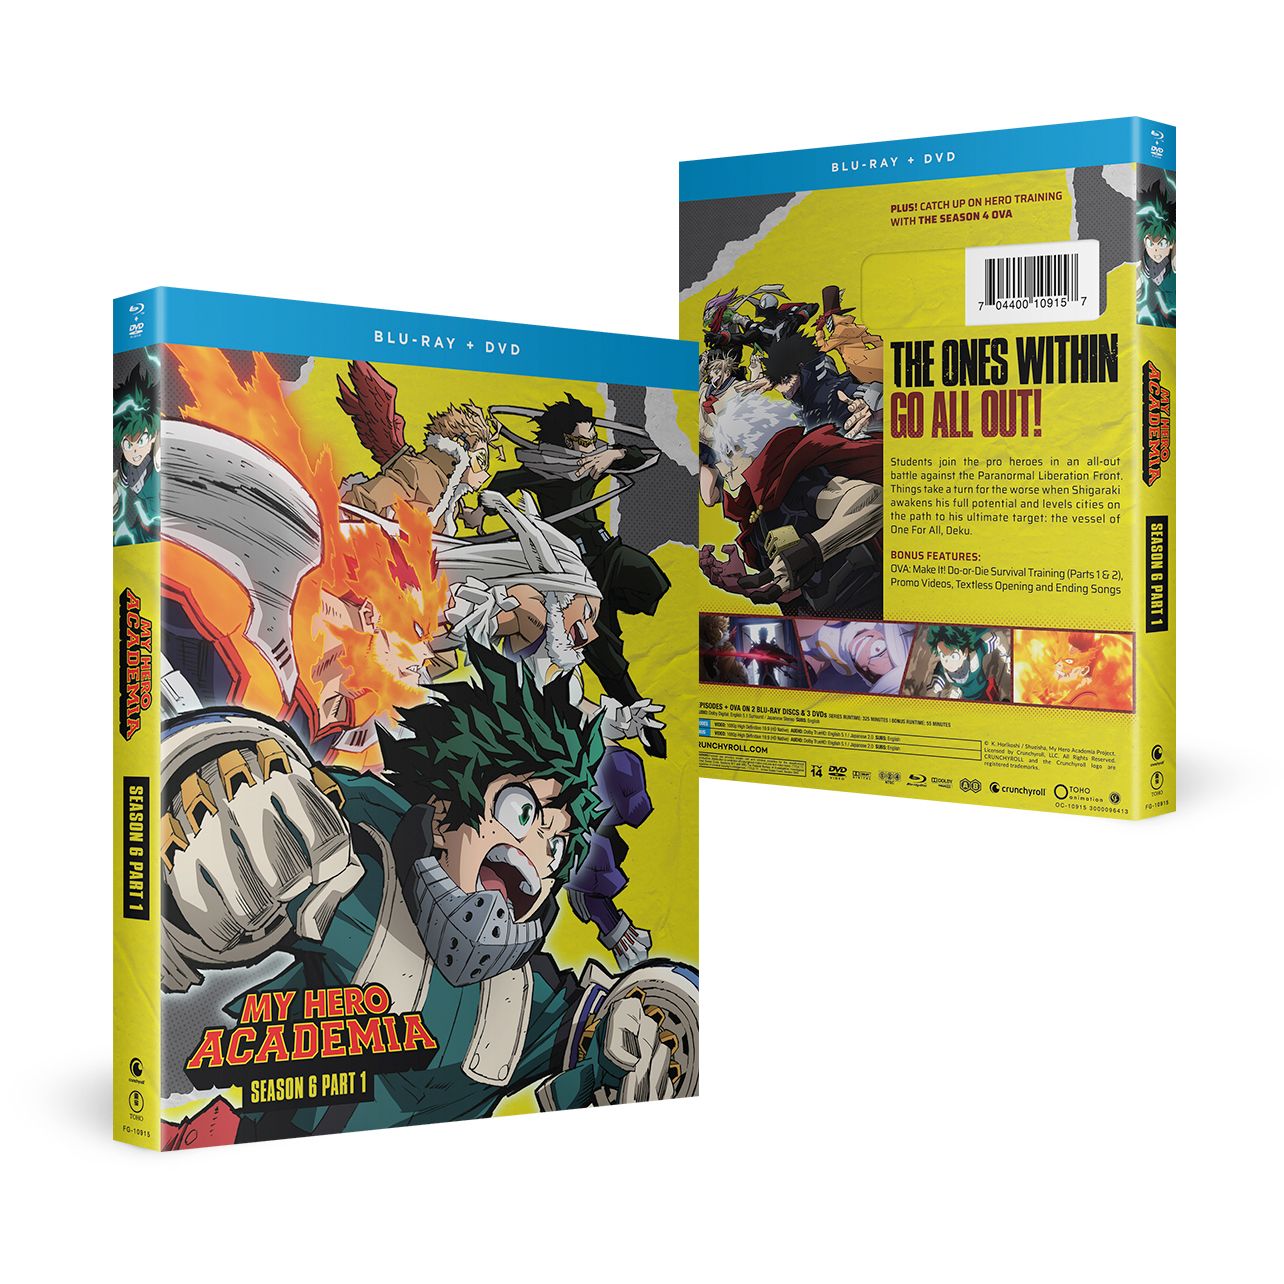 My Hero Academia Season 6 Part 1 Blu-ray Review: The Series’ Greatest Arc Comes to Home Video